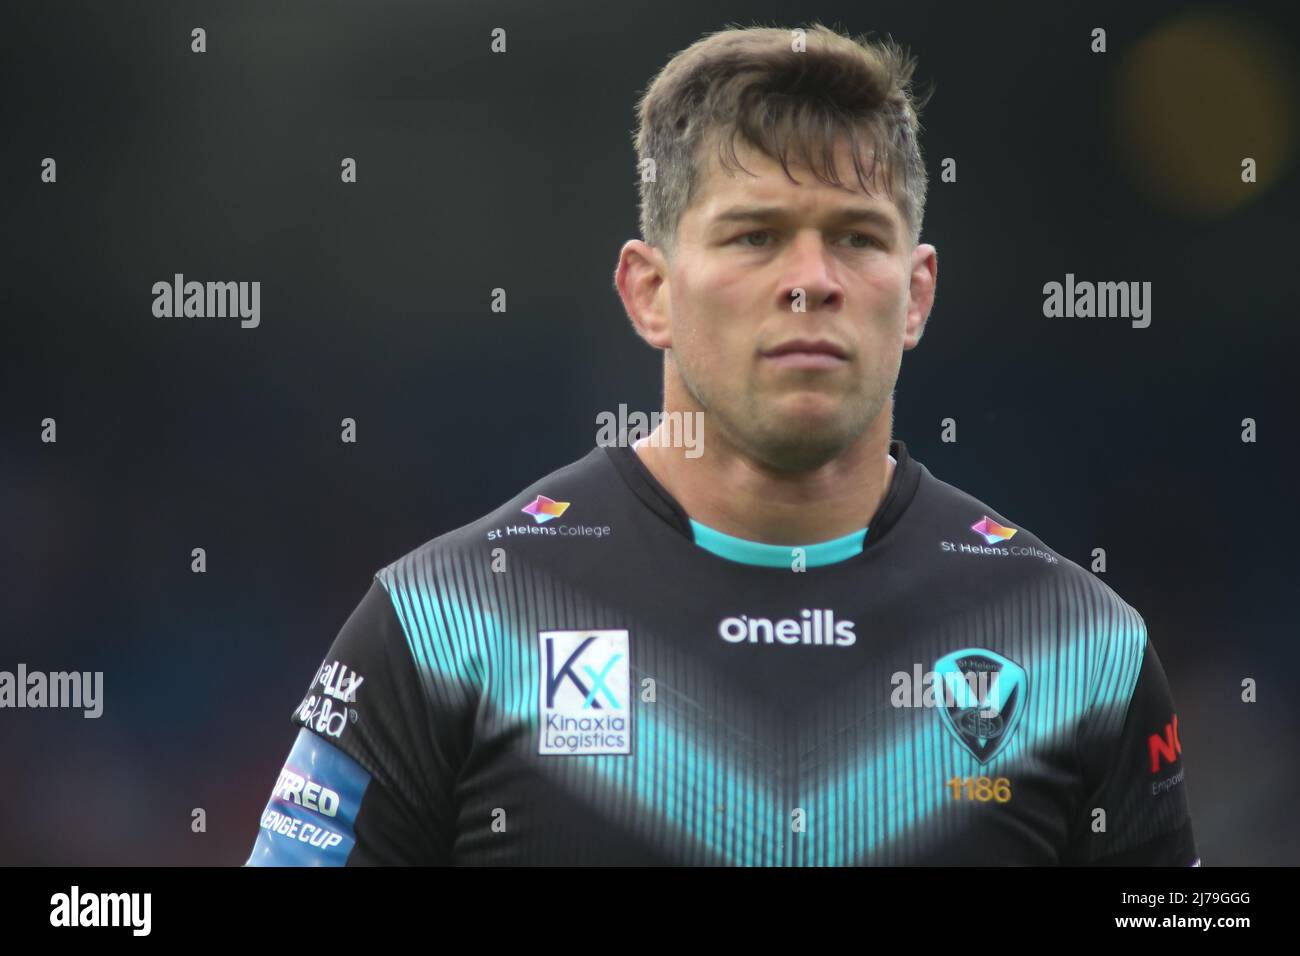 Elland Road, Leeds, West Yorkshire, 7th maggio 2022. Betfred Challenge Cup semi-finale Wigan Warriors vs St Helens Louie McCarthy-Scarsbrook of St Helens RLFC Credit: Touchlinepics/Alamy Live News Foto Stock